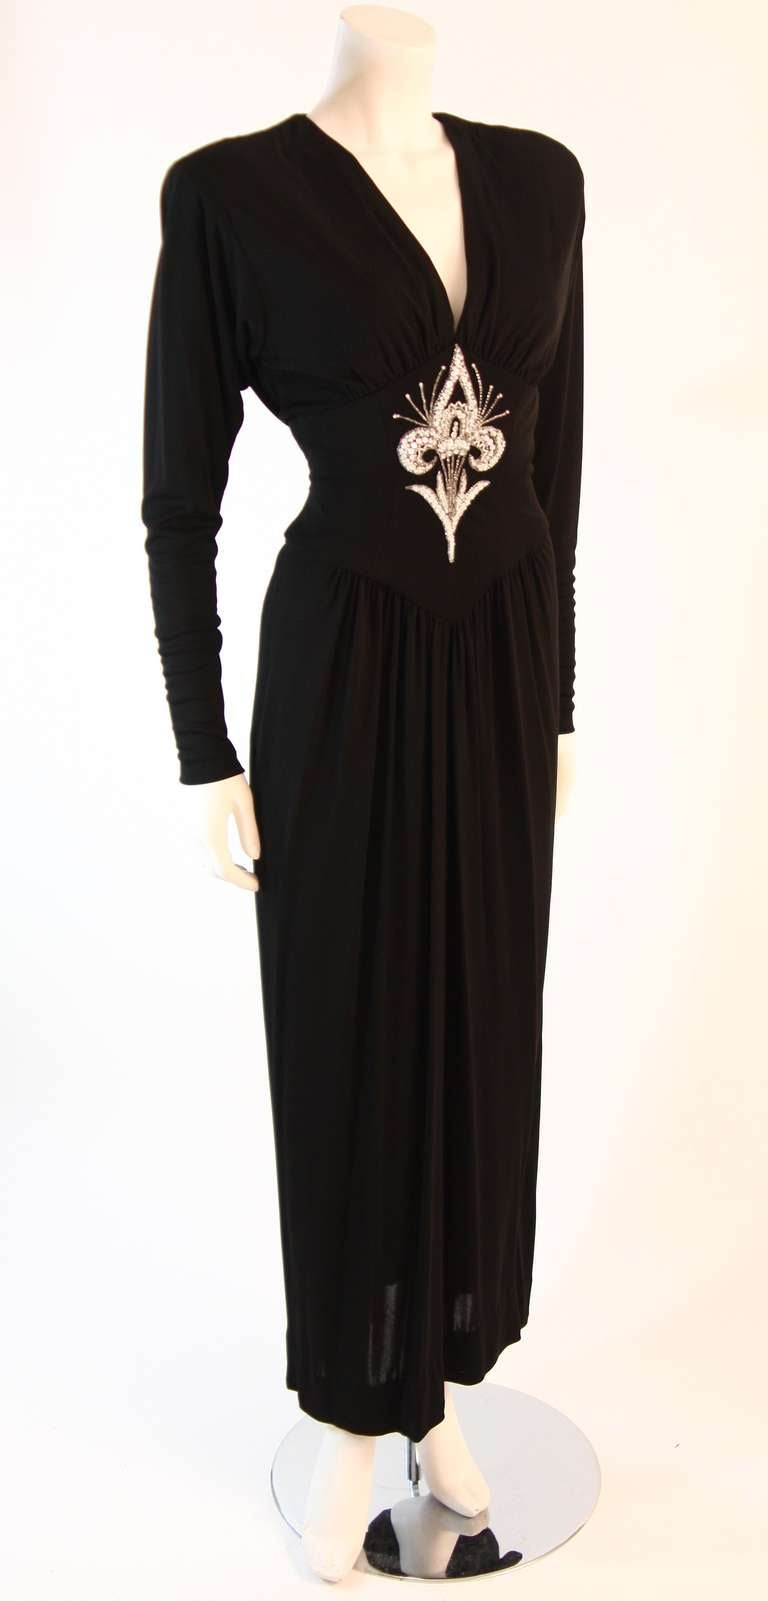 This is a Bob Mackie gown. This gown features long sleeves, gathers at the bust, and draped back. The gown is composed of a stretch black outer material lined with a non-stretch material for structure and foundation. Center back zipper closure. A